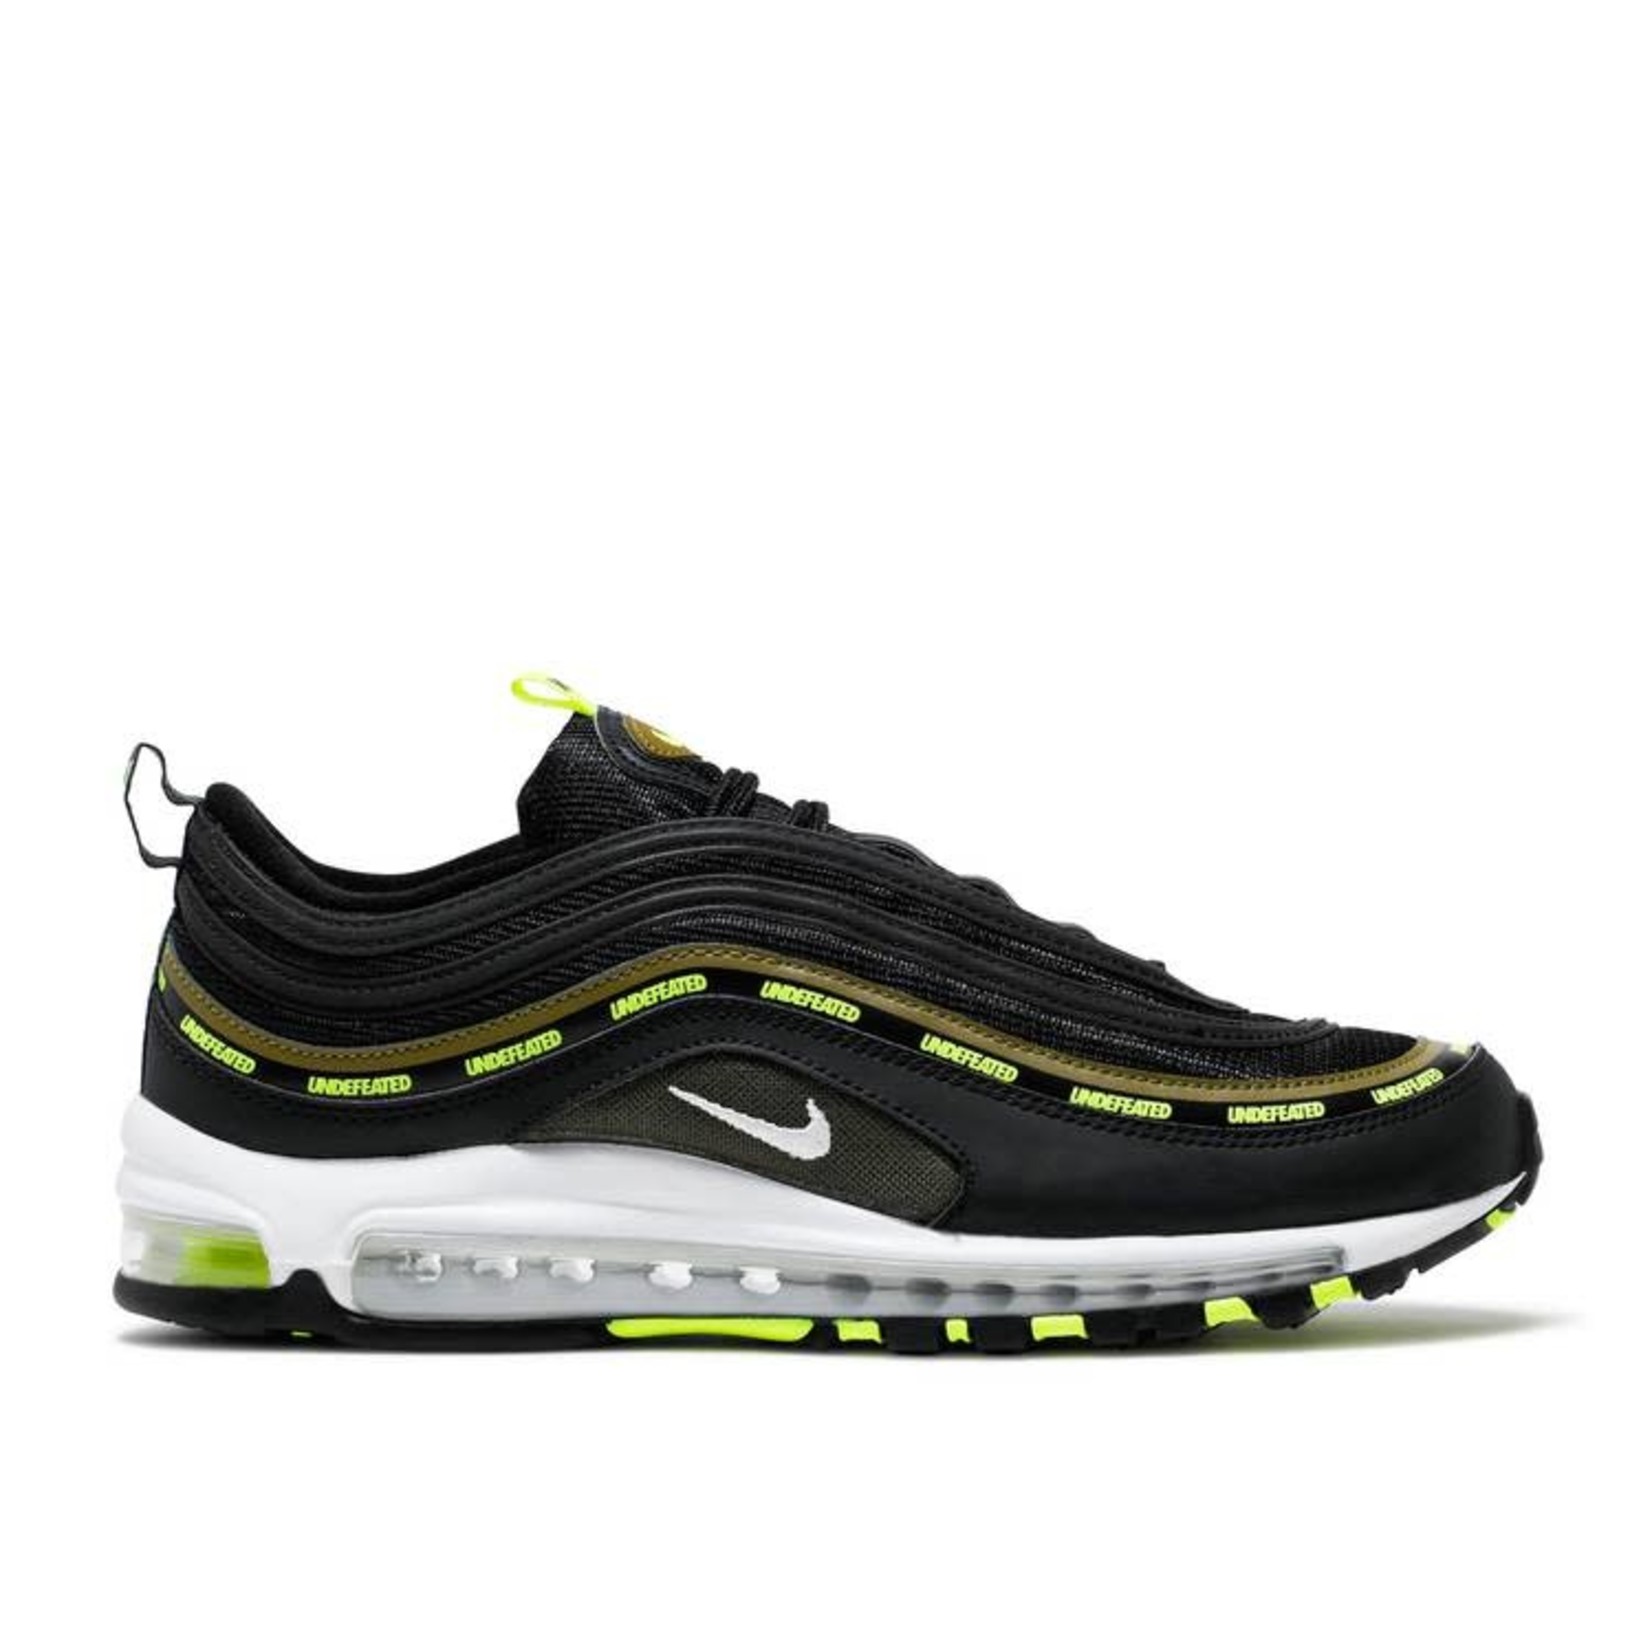 Nike Nike Air Max 97 Undefeated Black Volt Size 11, DS BRAND NEW